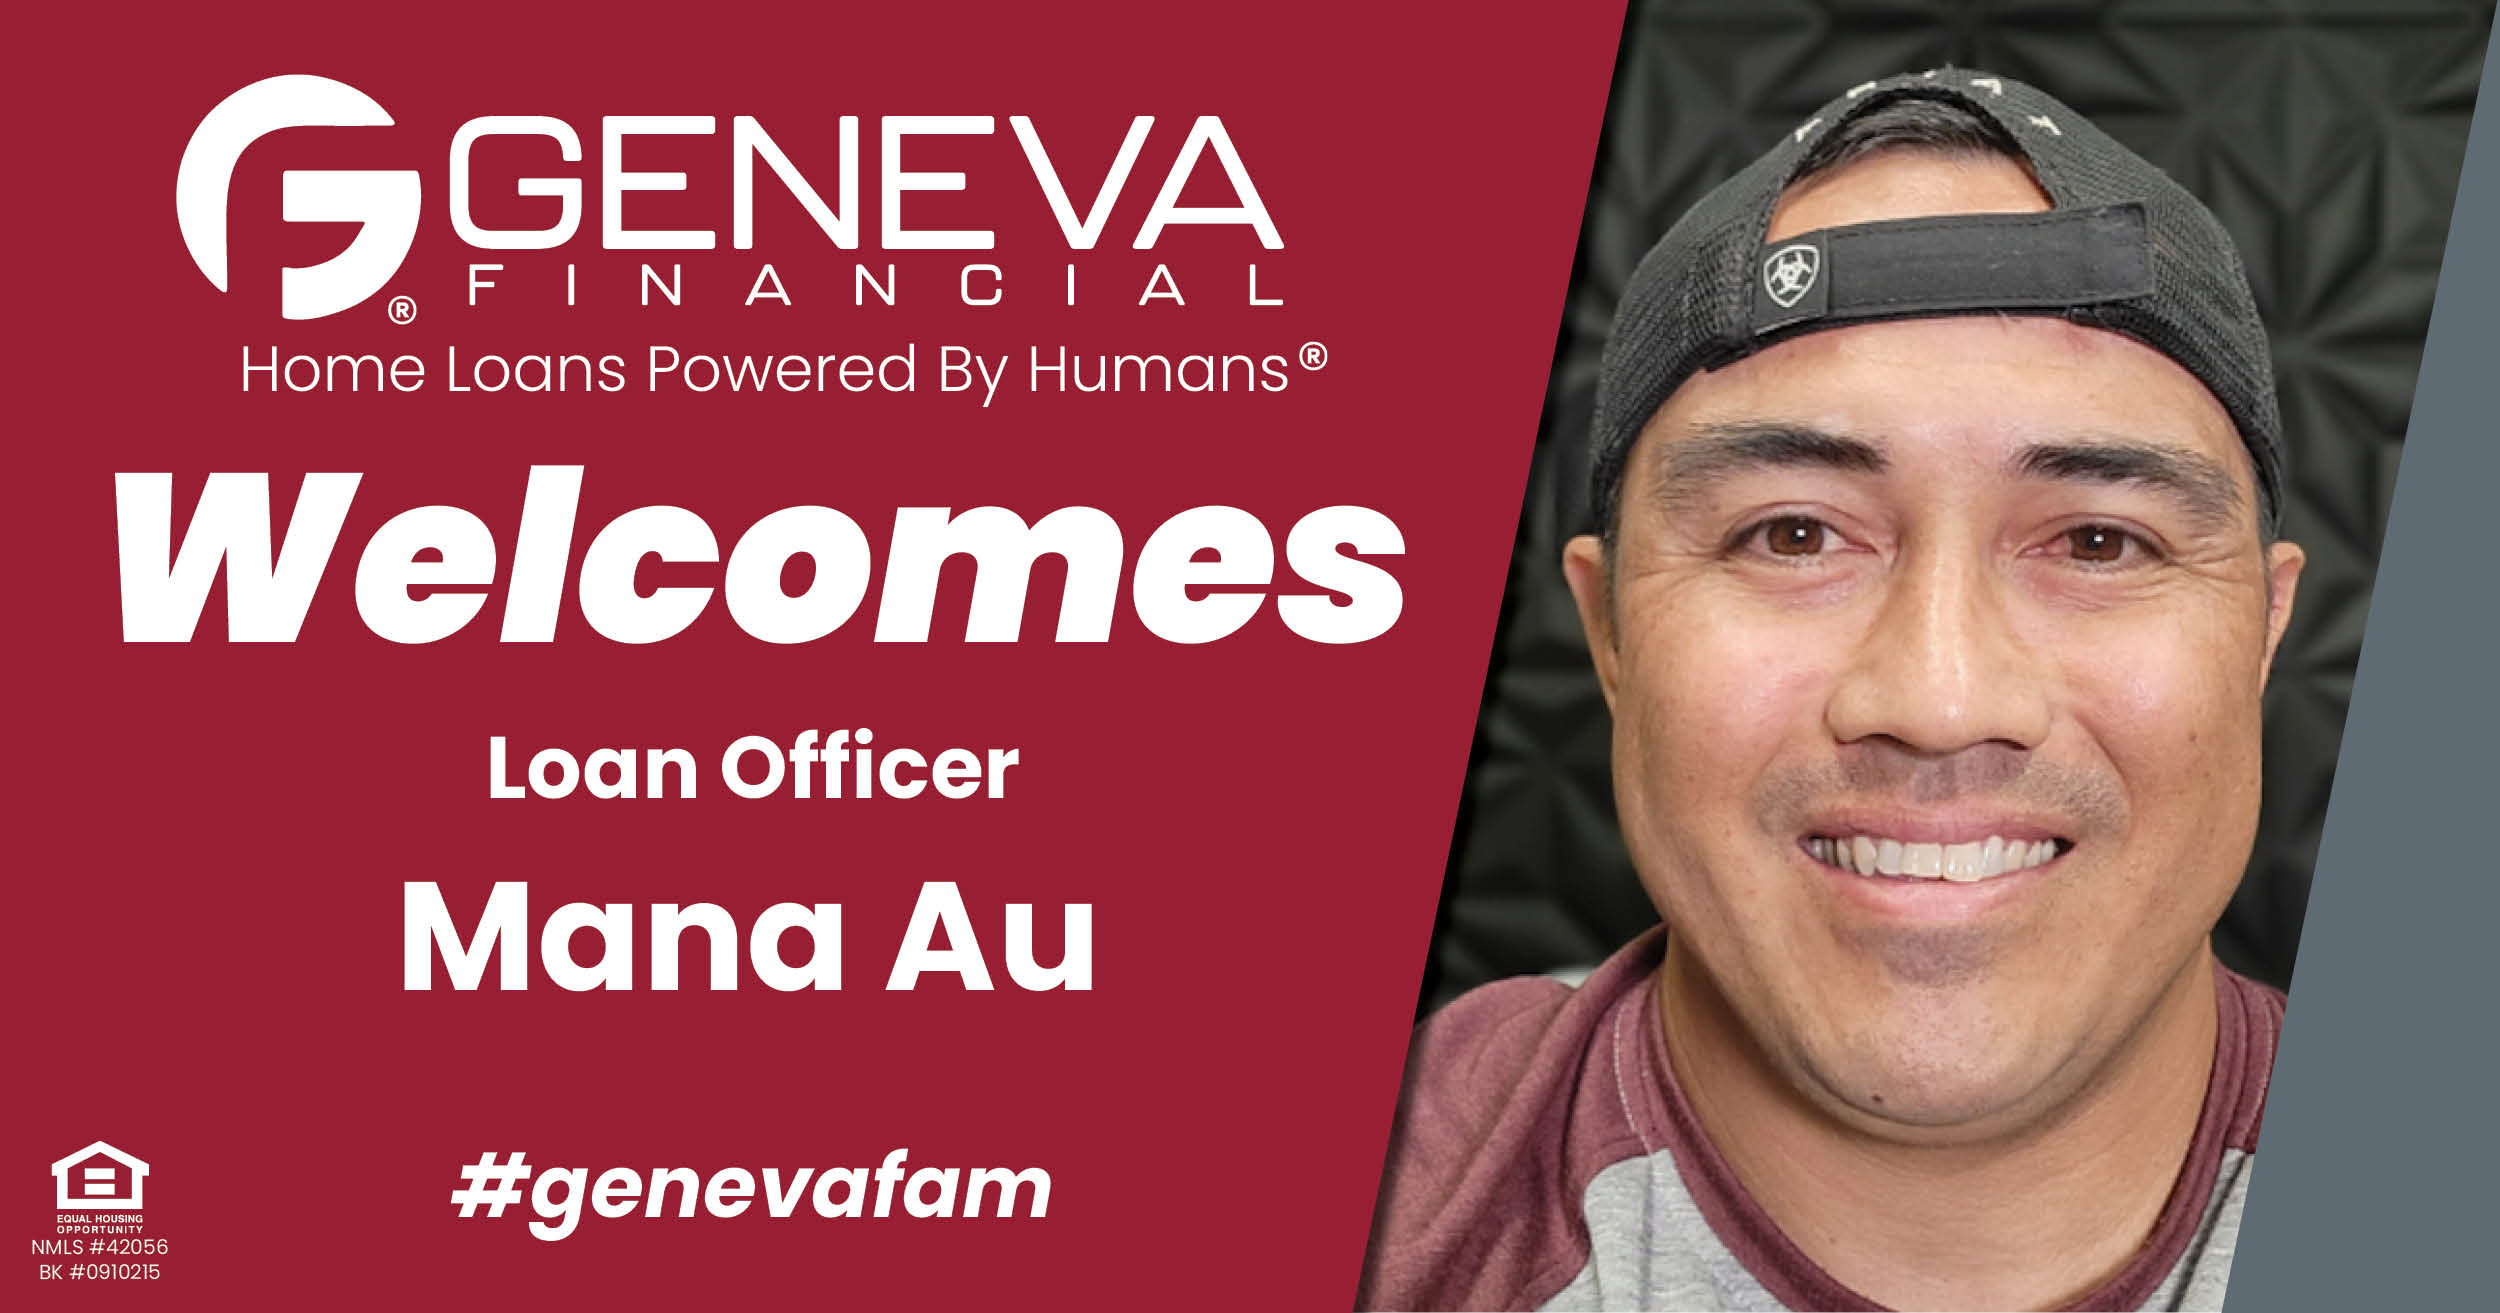 Geneva Financial Welcomes New Loan Officer Mana Au to Arizona Market – Home Loans Powered by Humans®.